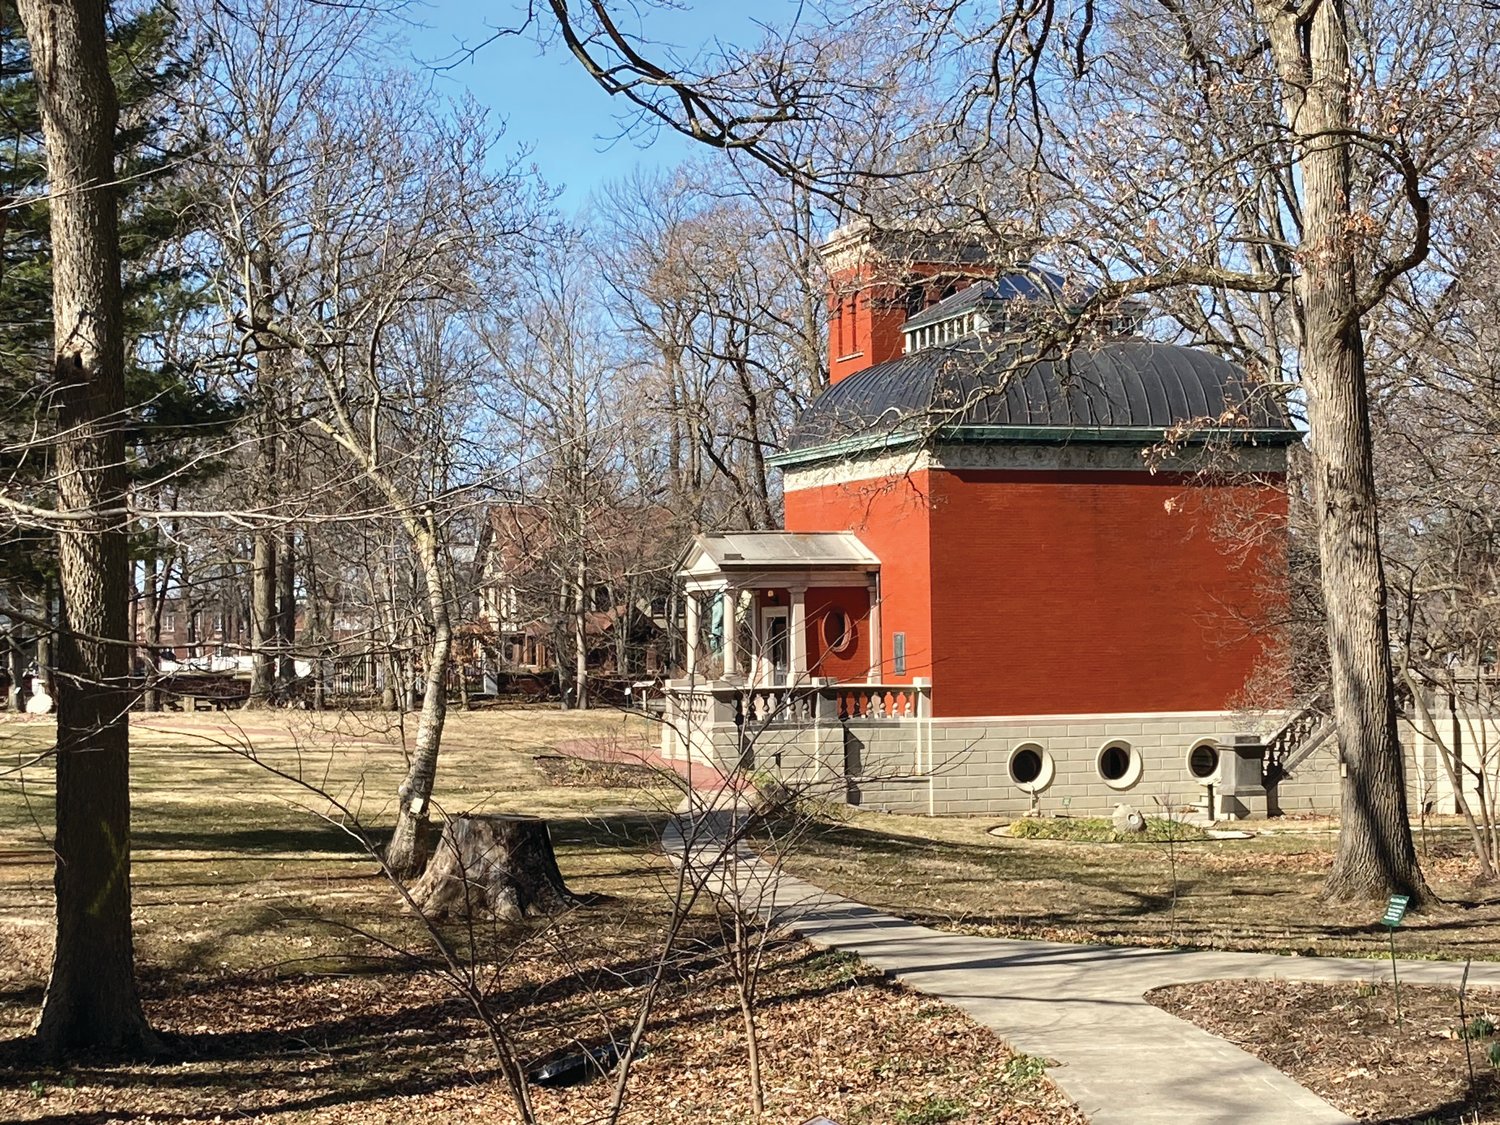 The General Lew Wallace Study & Museum reopened last month as local museums gear up for the new season.